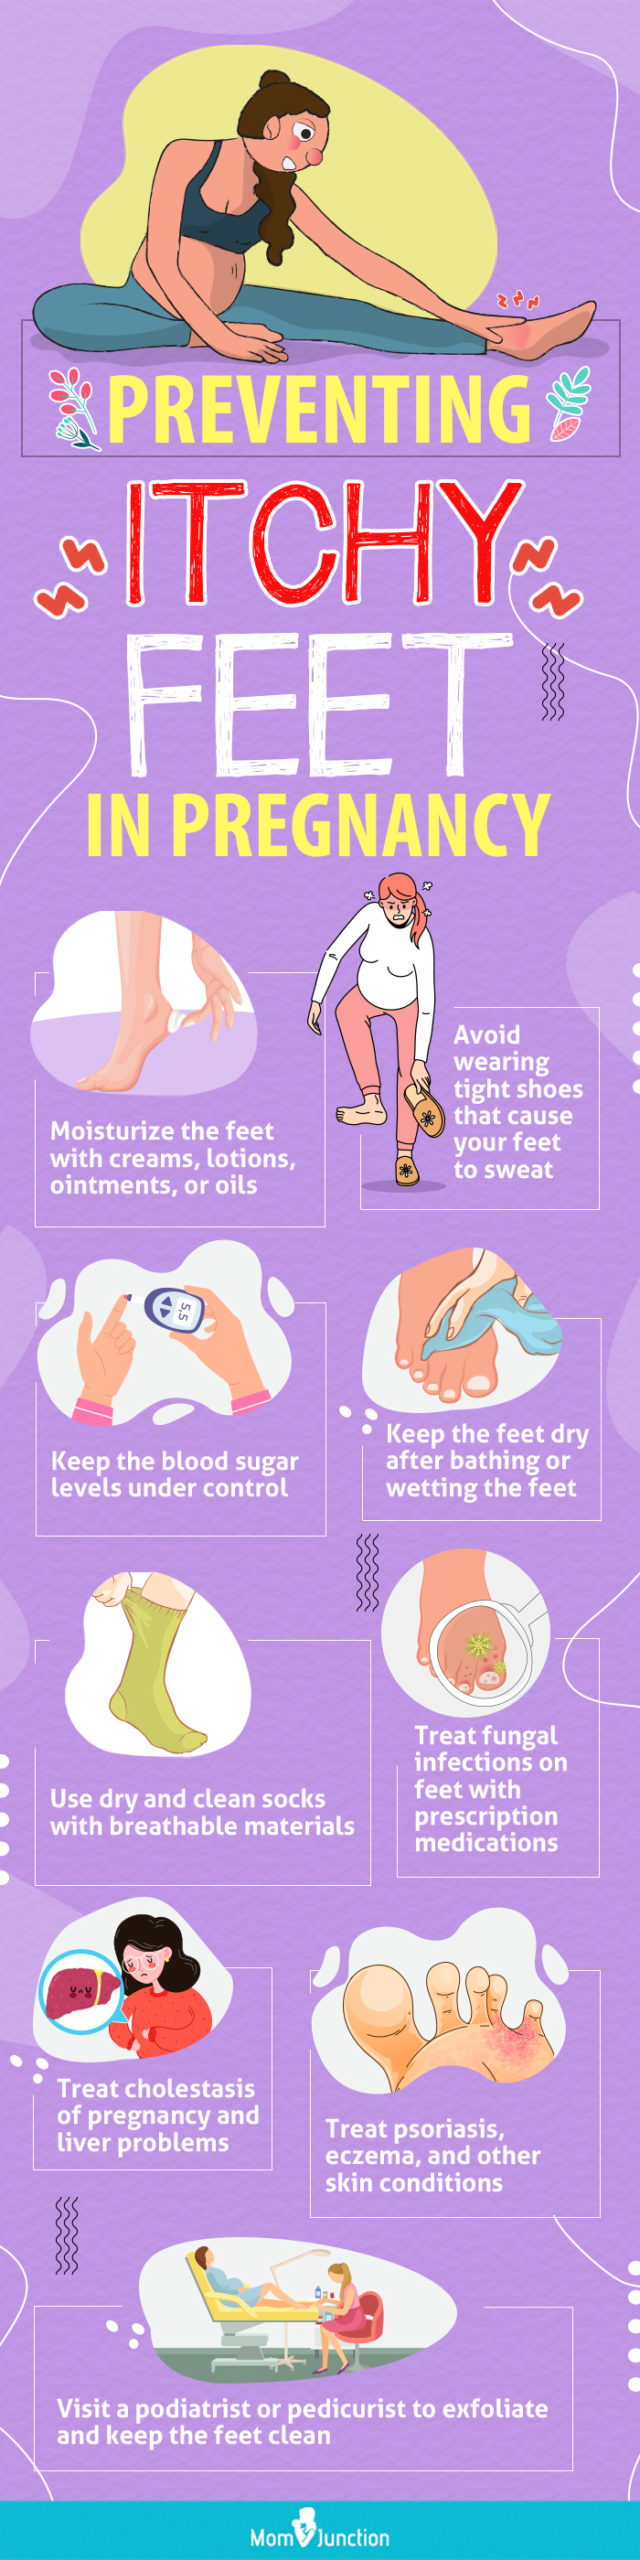 prevention of itchy feet in pregnancy (infographic)